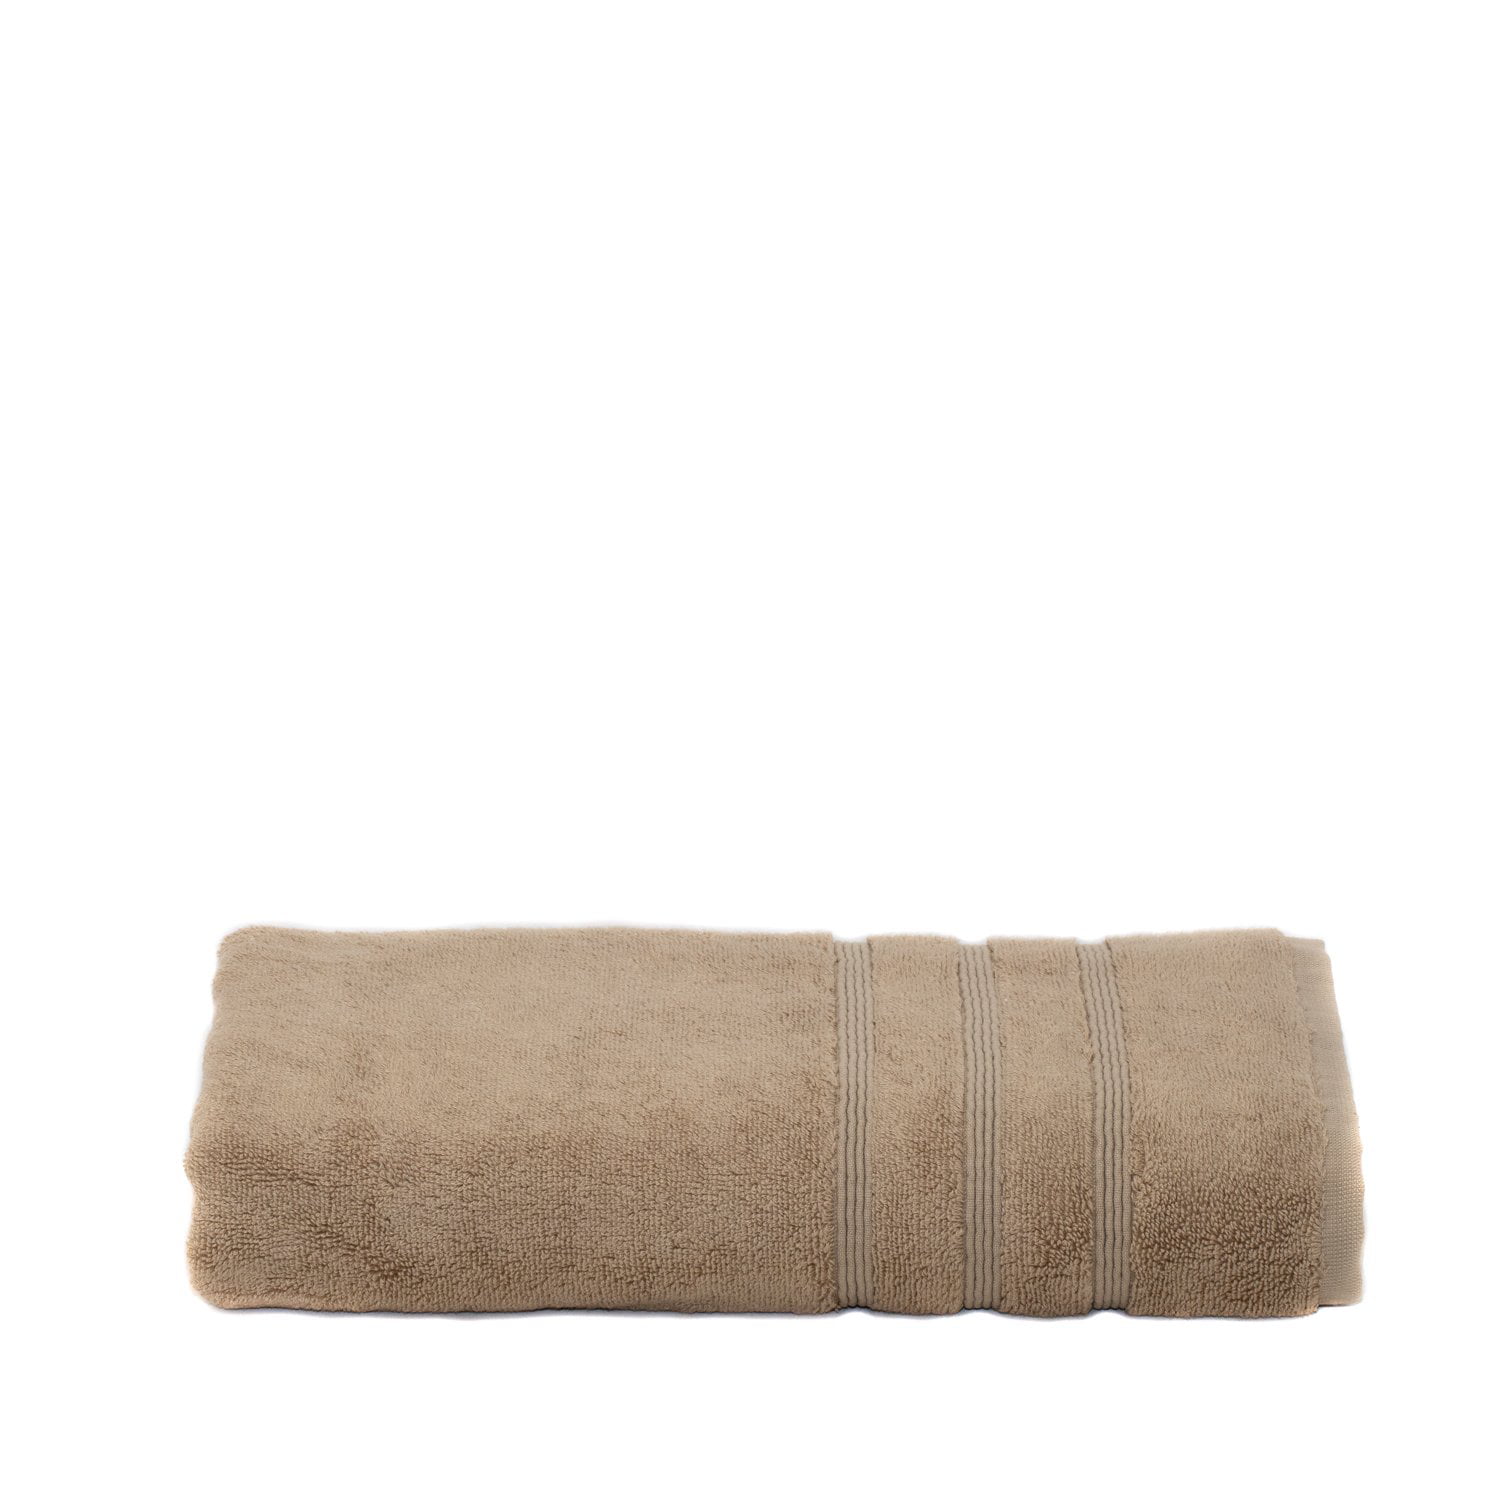 Details about   Natural 120x90cm Bamboo GREY Organic Towels x 2 SAVE!!!!! 25% OFF NOW 